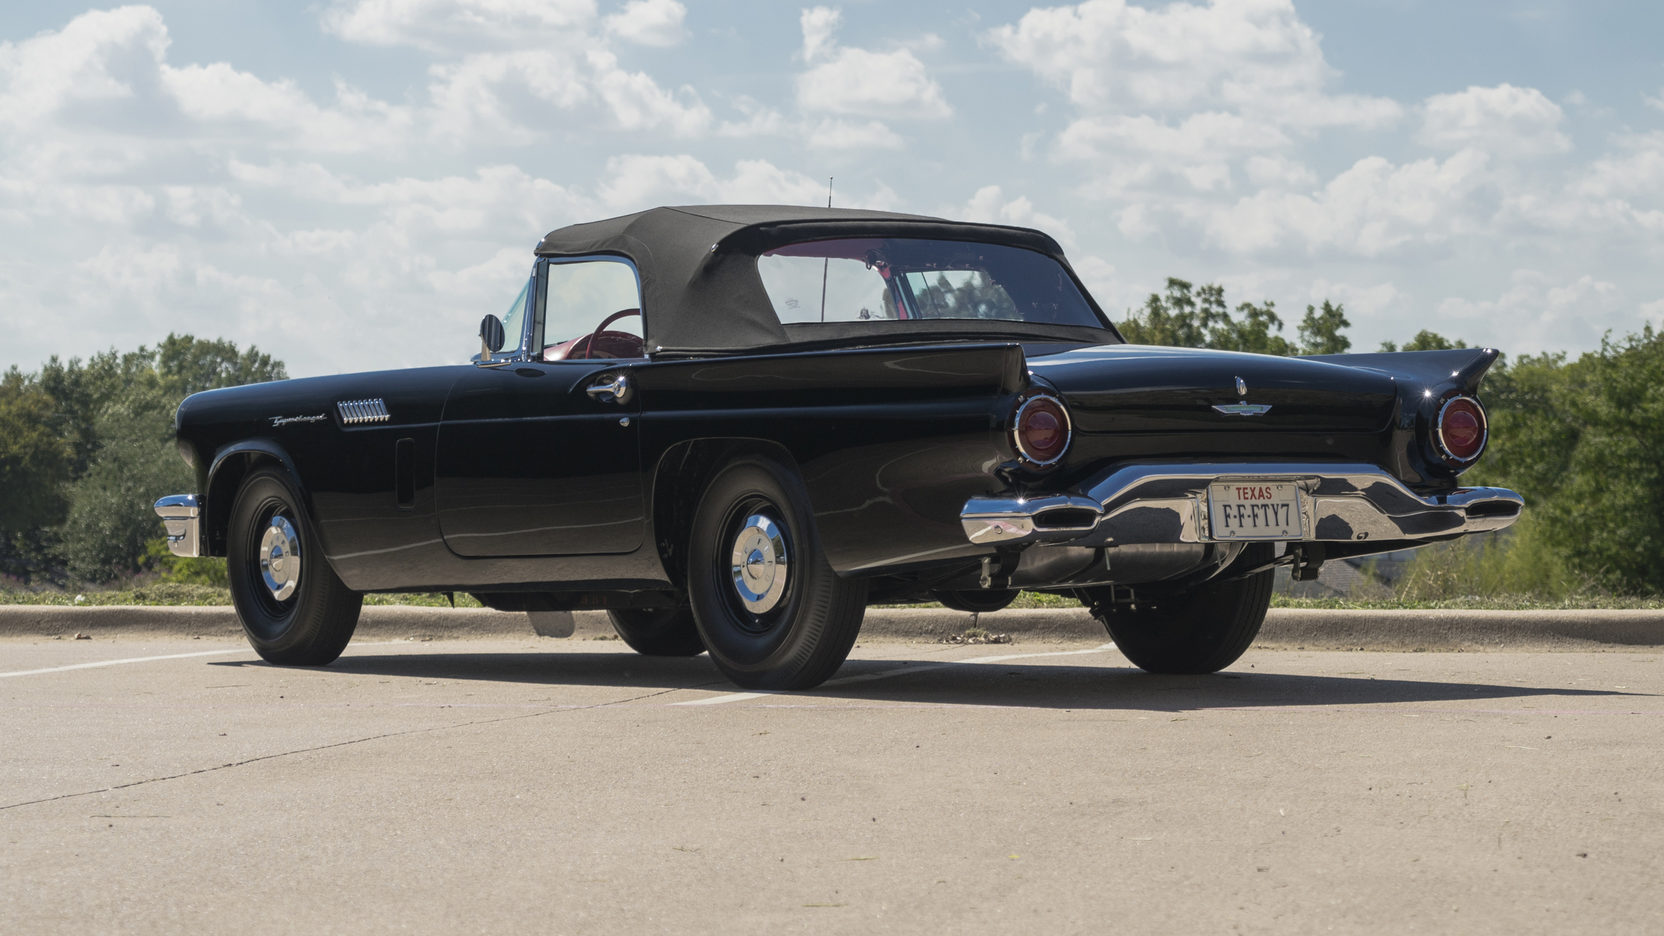 This is the view most people would have of the Thunderbird F-Bird; the rear of the car as it passed them.